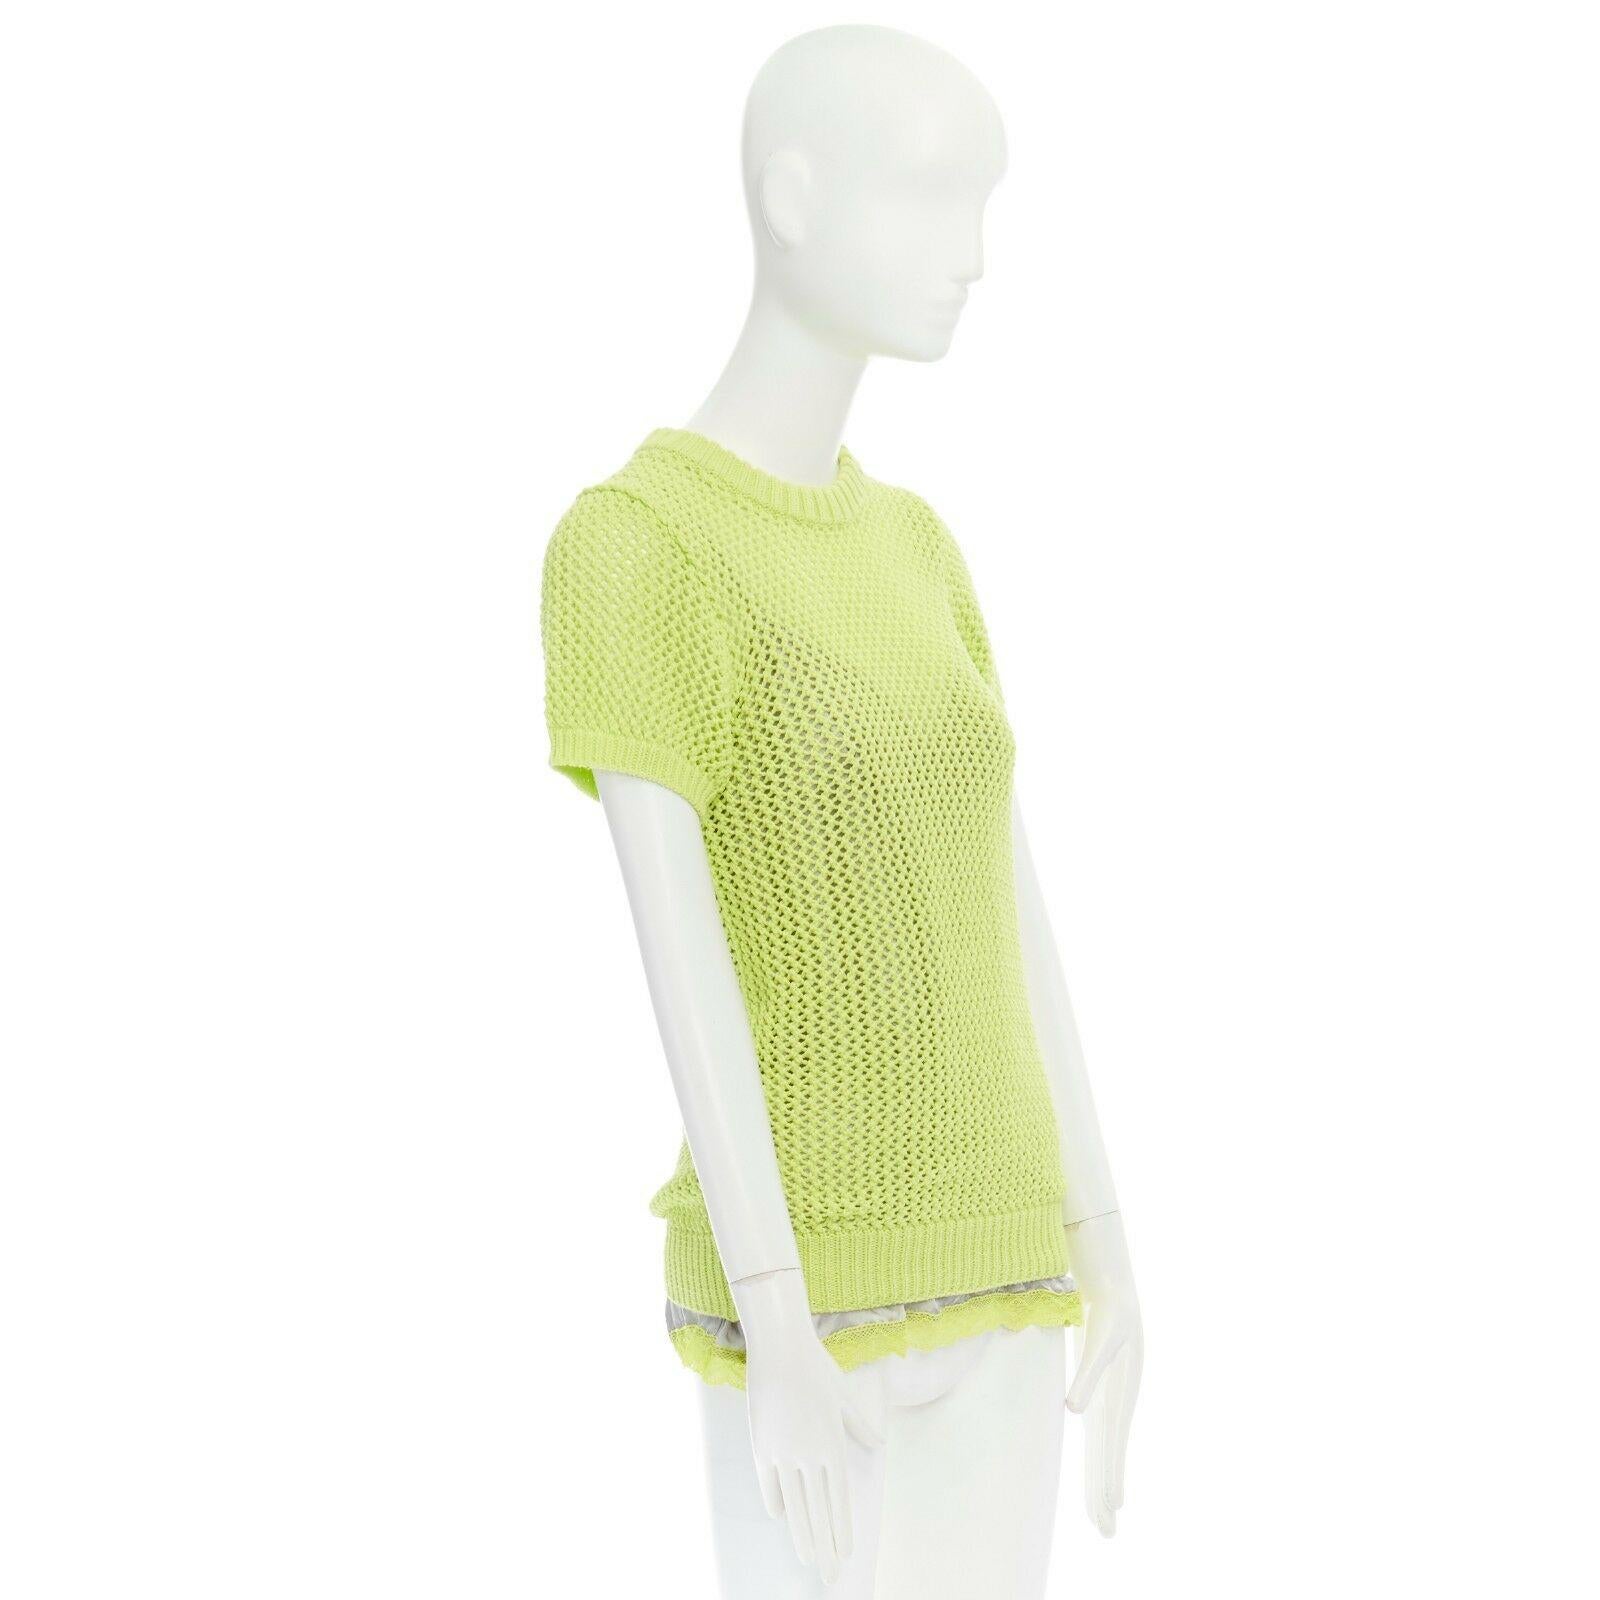 Gray SACAI LUCK neon yellow grey lace trimmed camisole crochet knit sweater top JP3 L